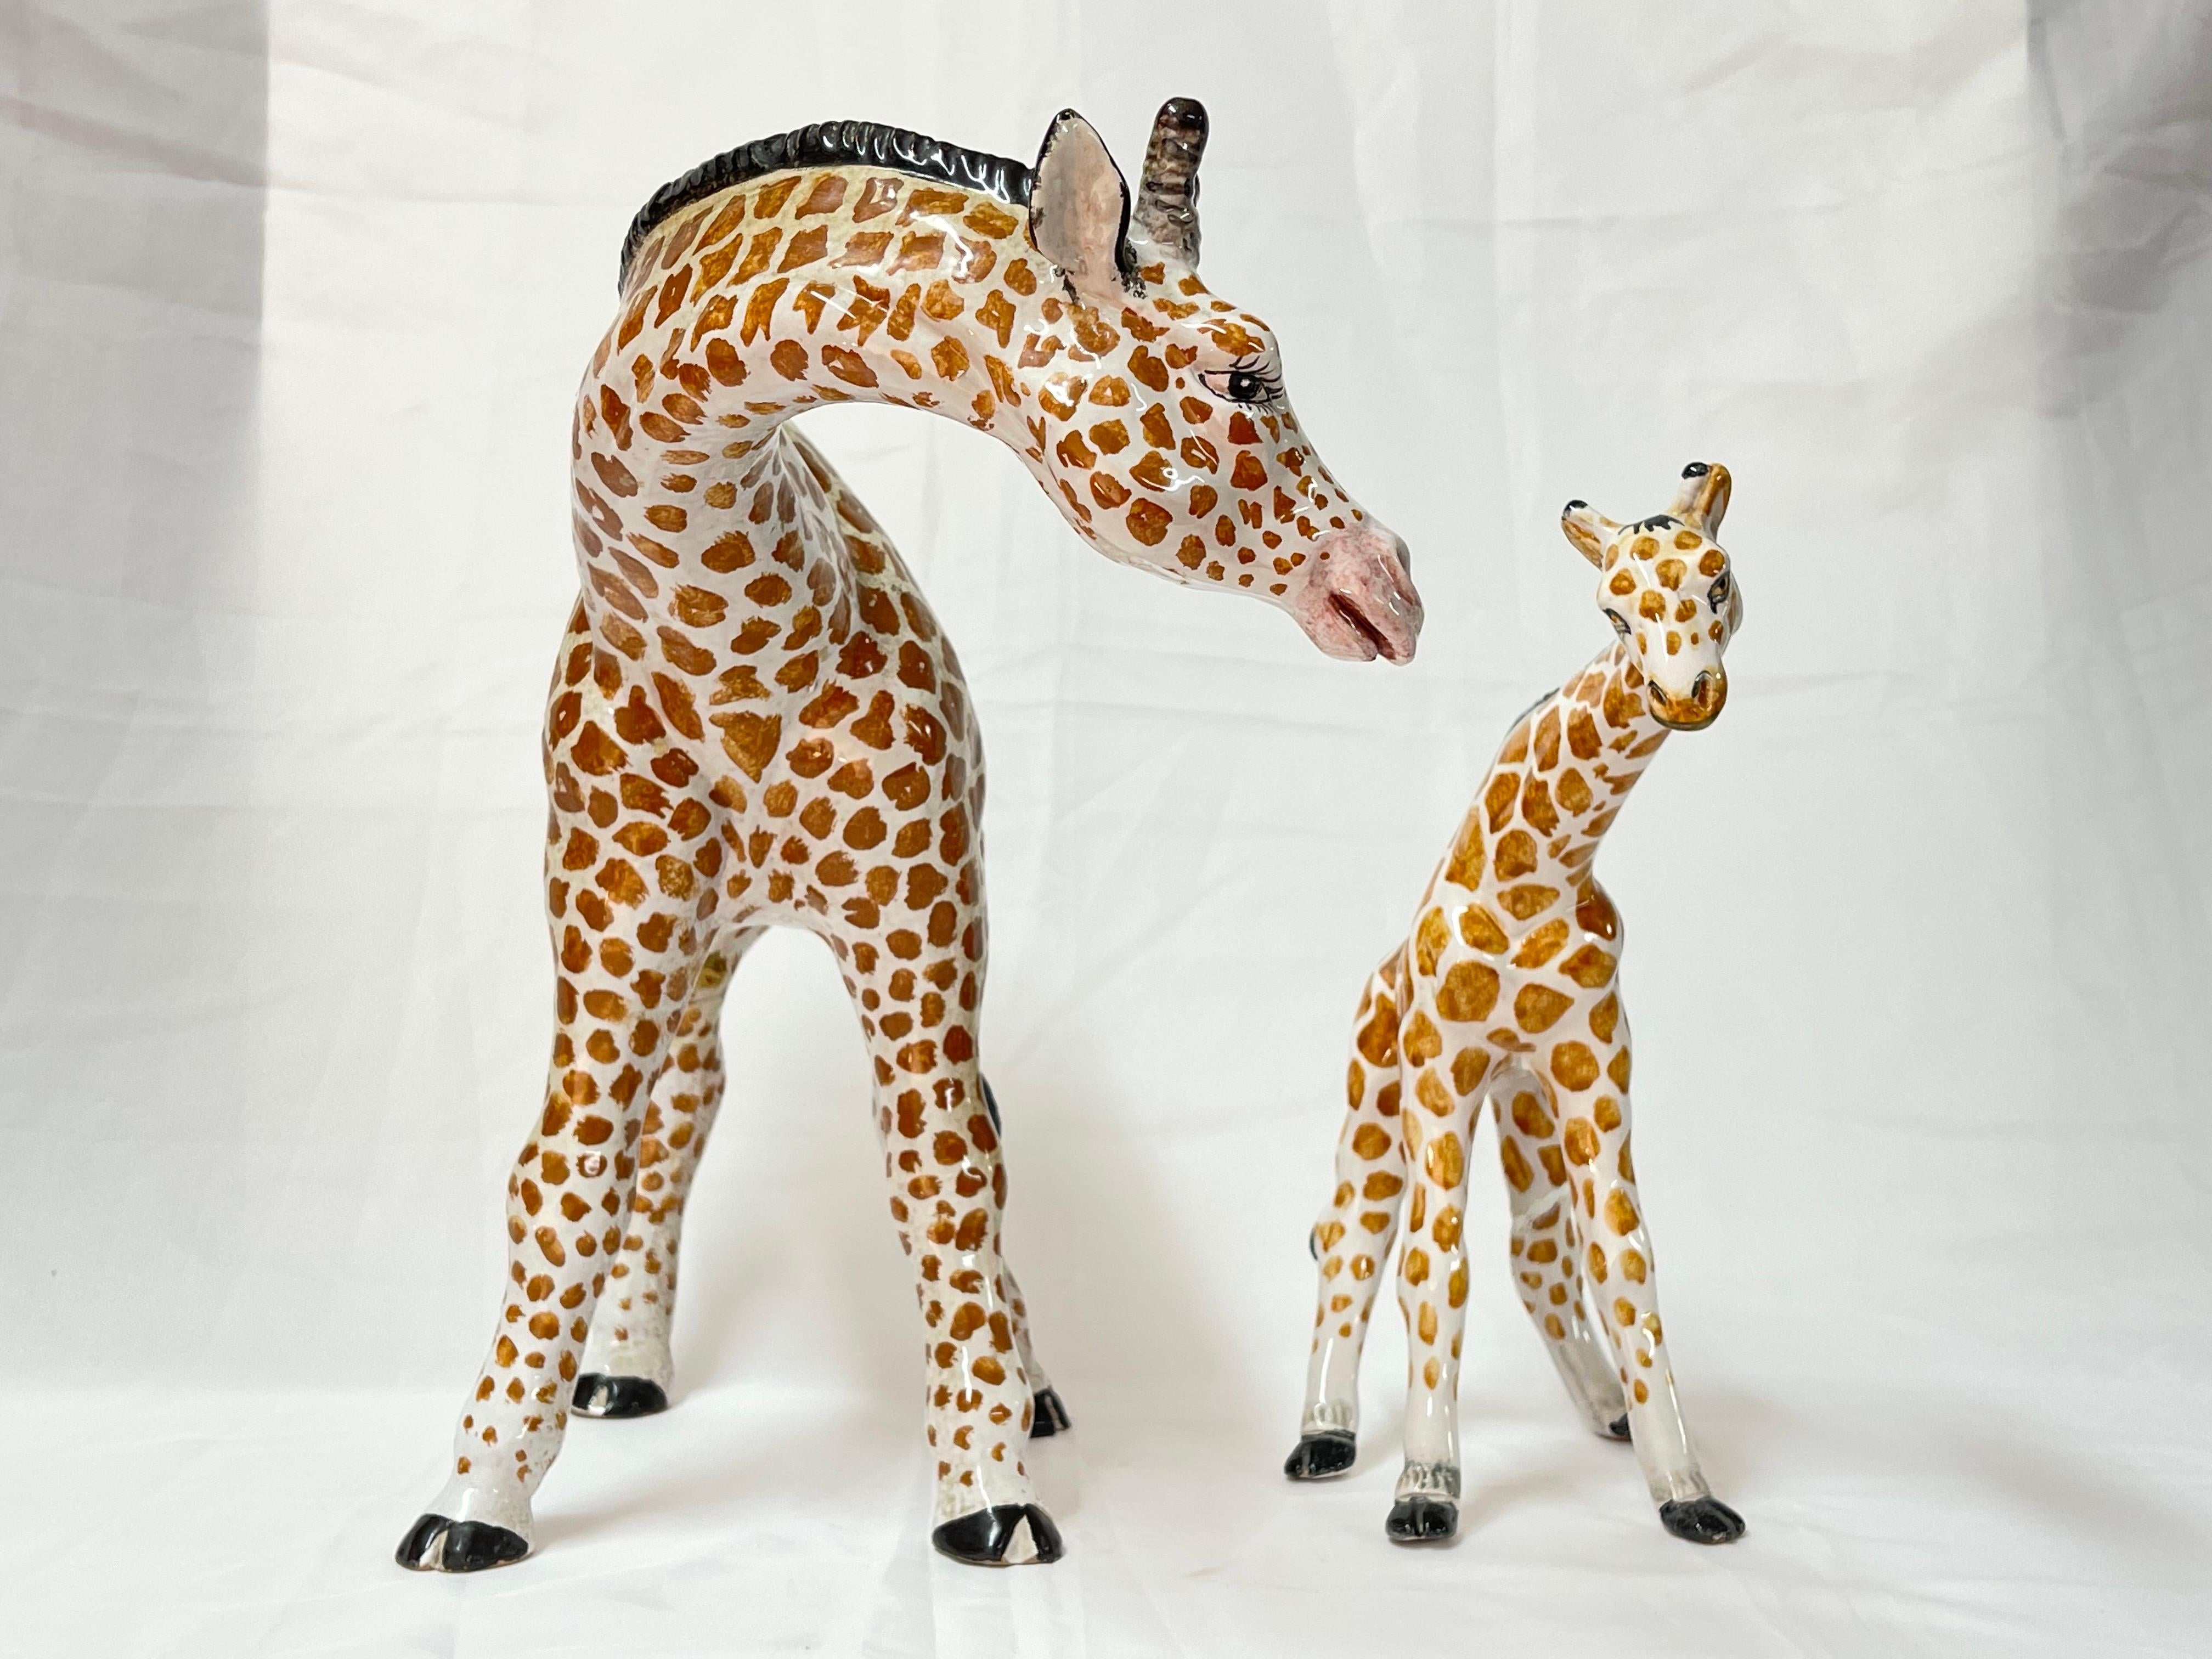 1970's Pair of Large Italian Ceramic Giraffes. Endearing Mother and baby .
Largest giraffe measure approximately : 14.25